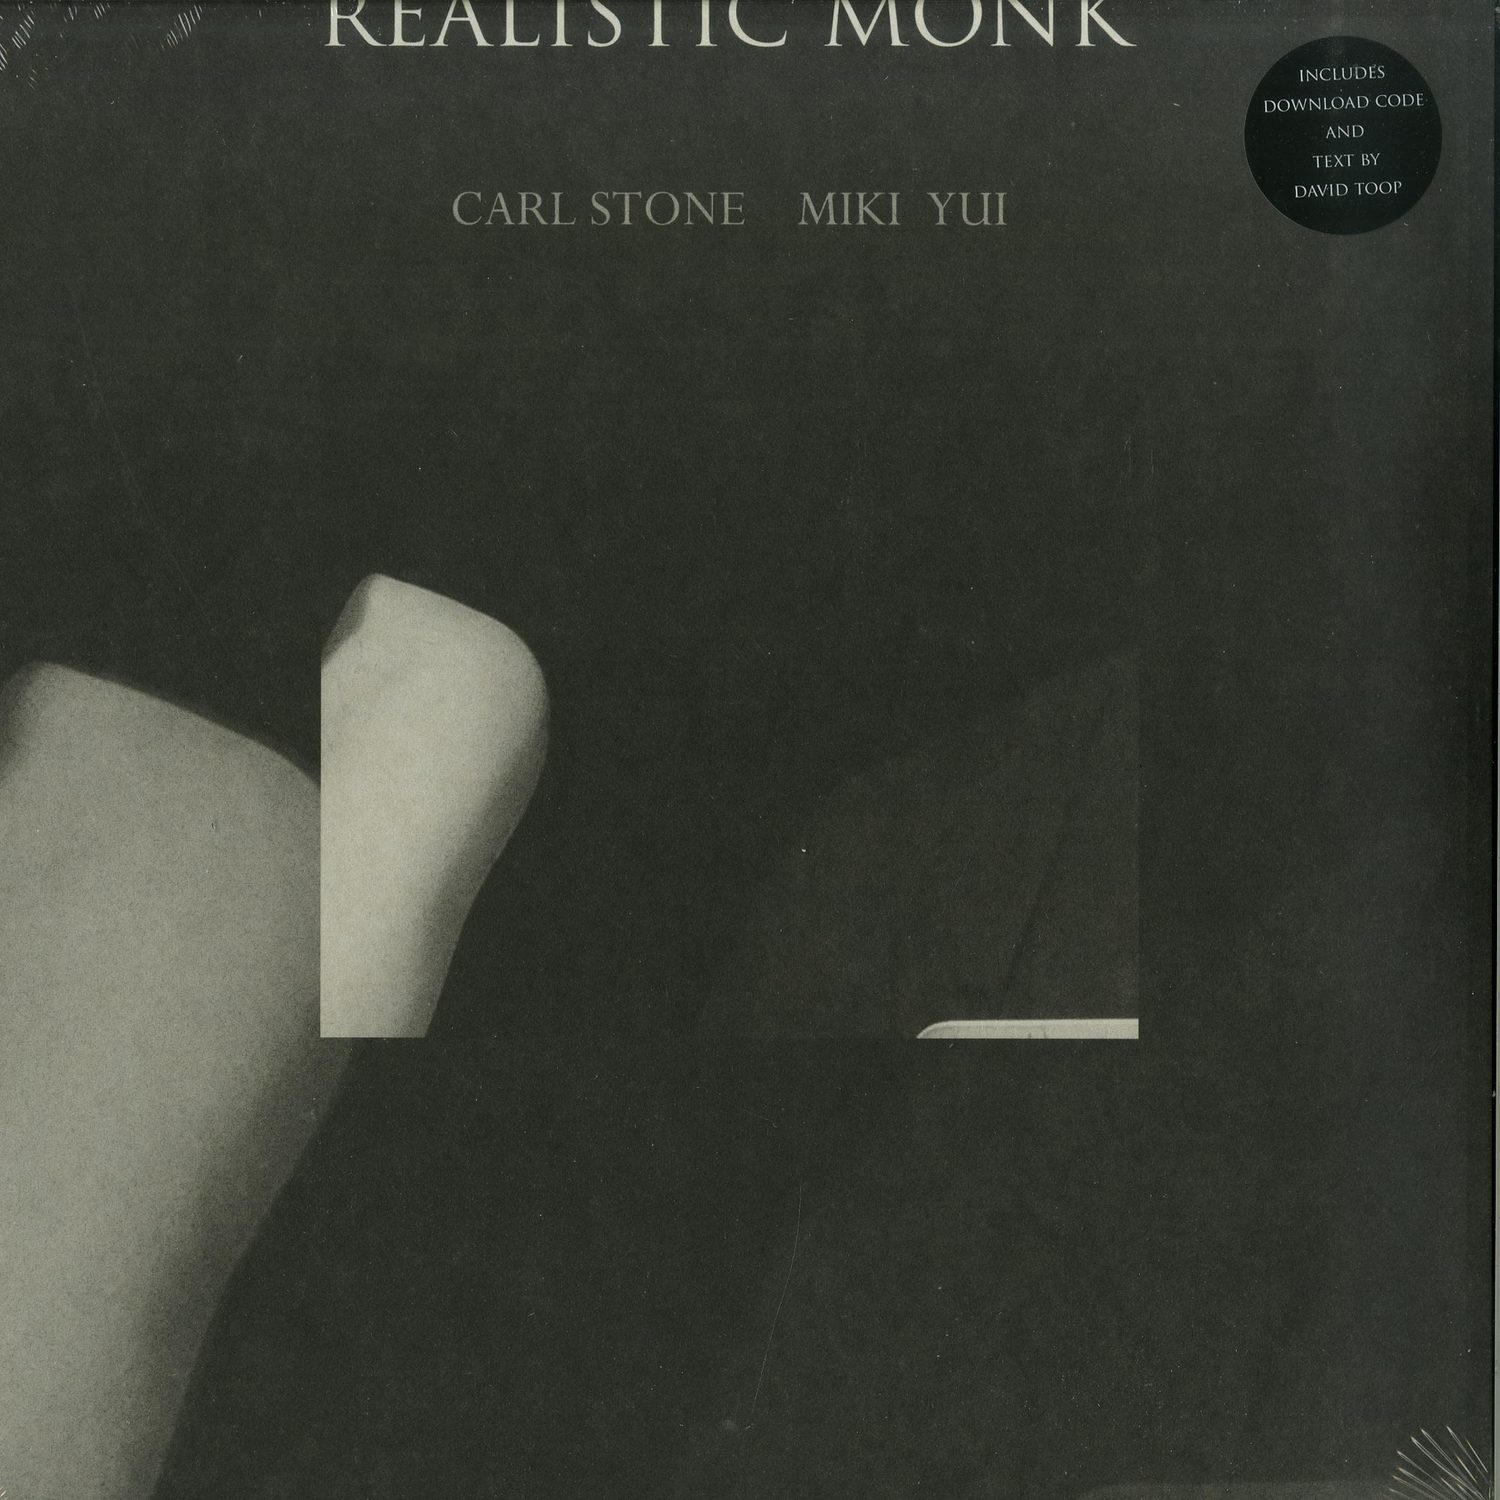 Realistic Monk  - REALM